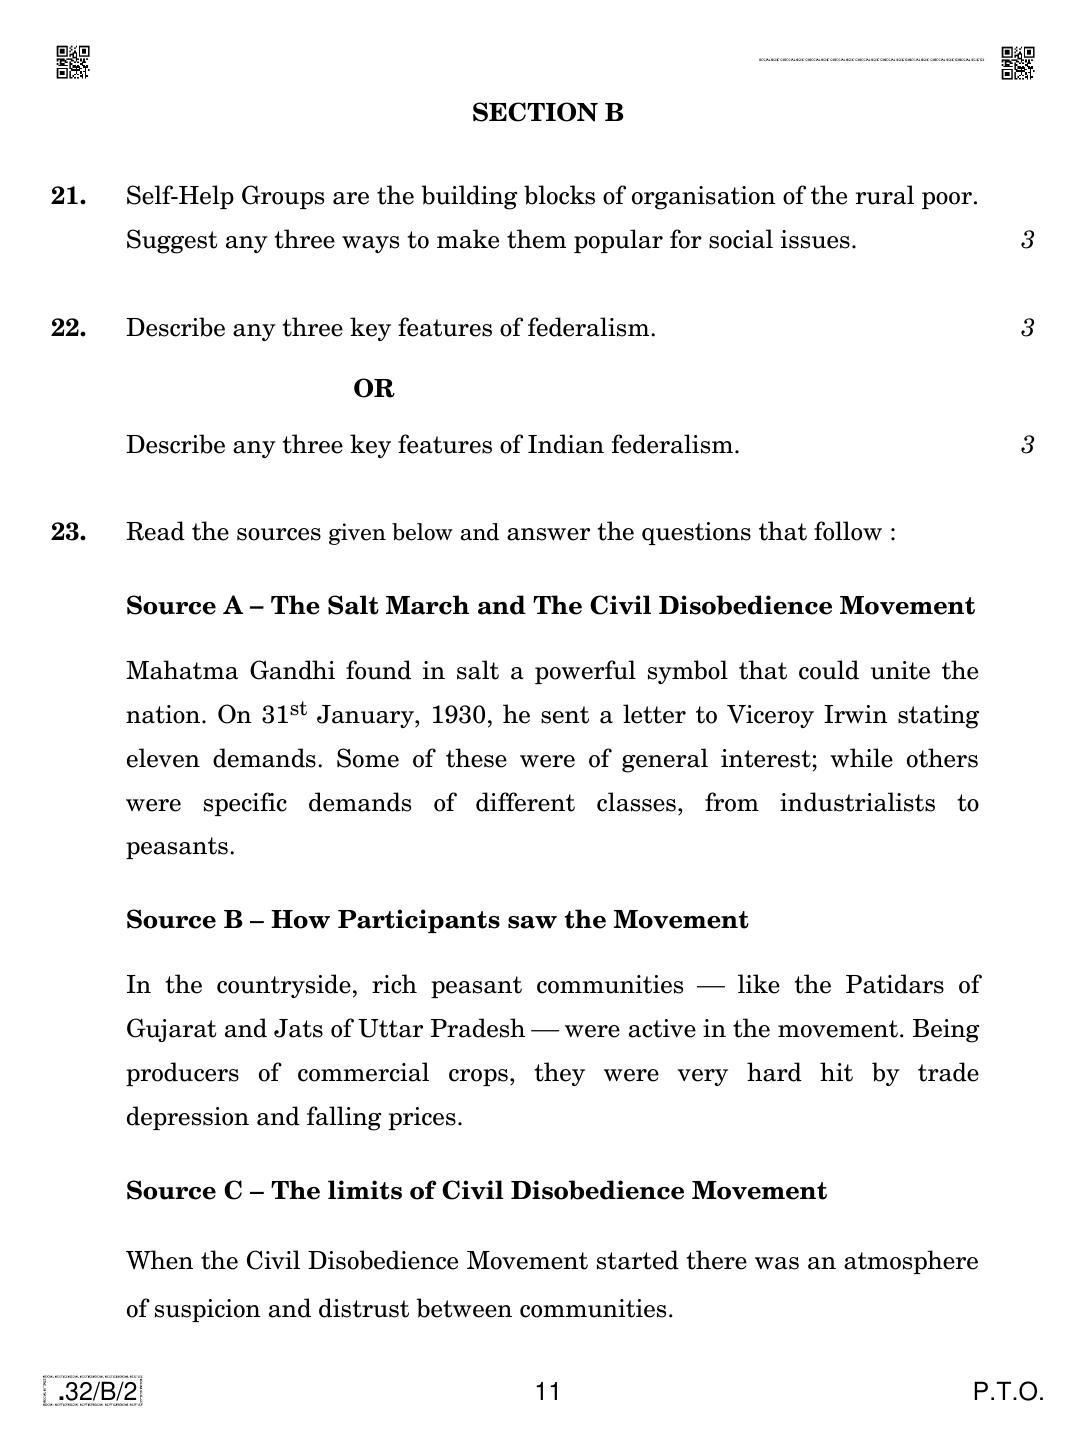 CBSE Class 10 32-C-2 Social Science 2020 Compartment Question Paper - Page 11